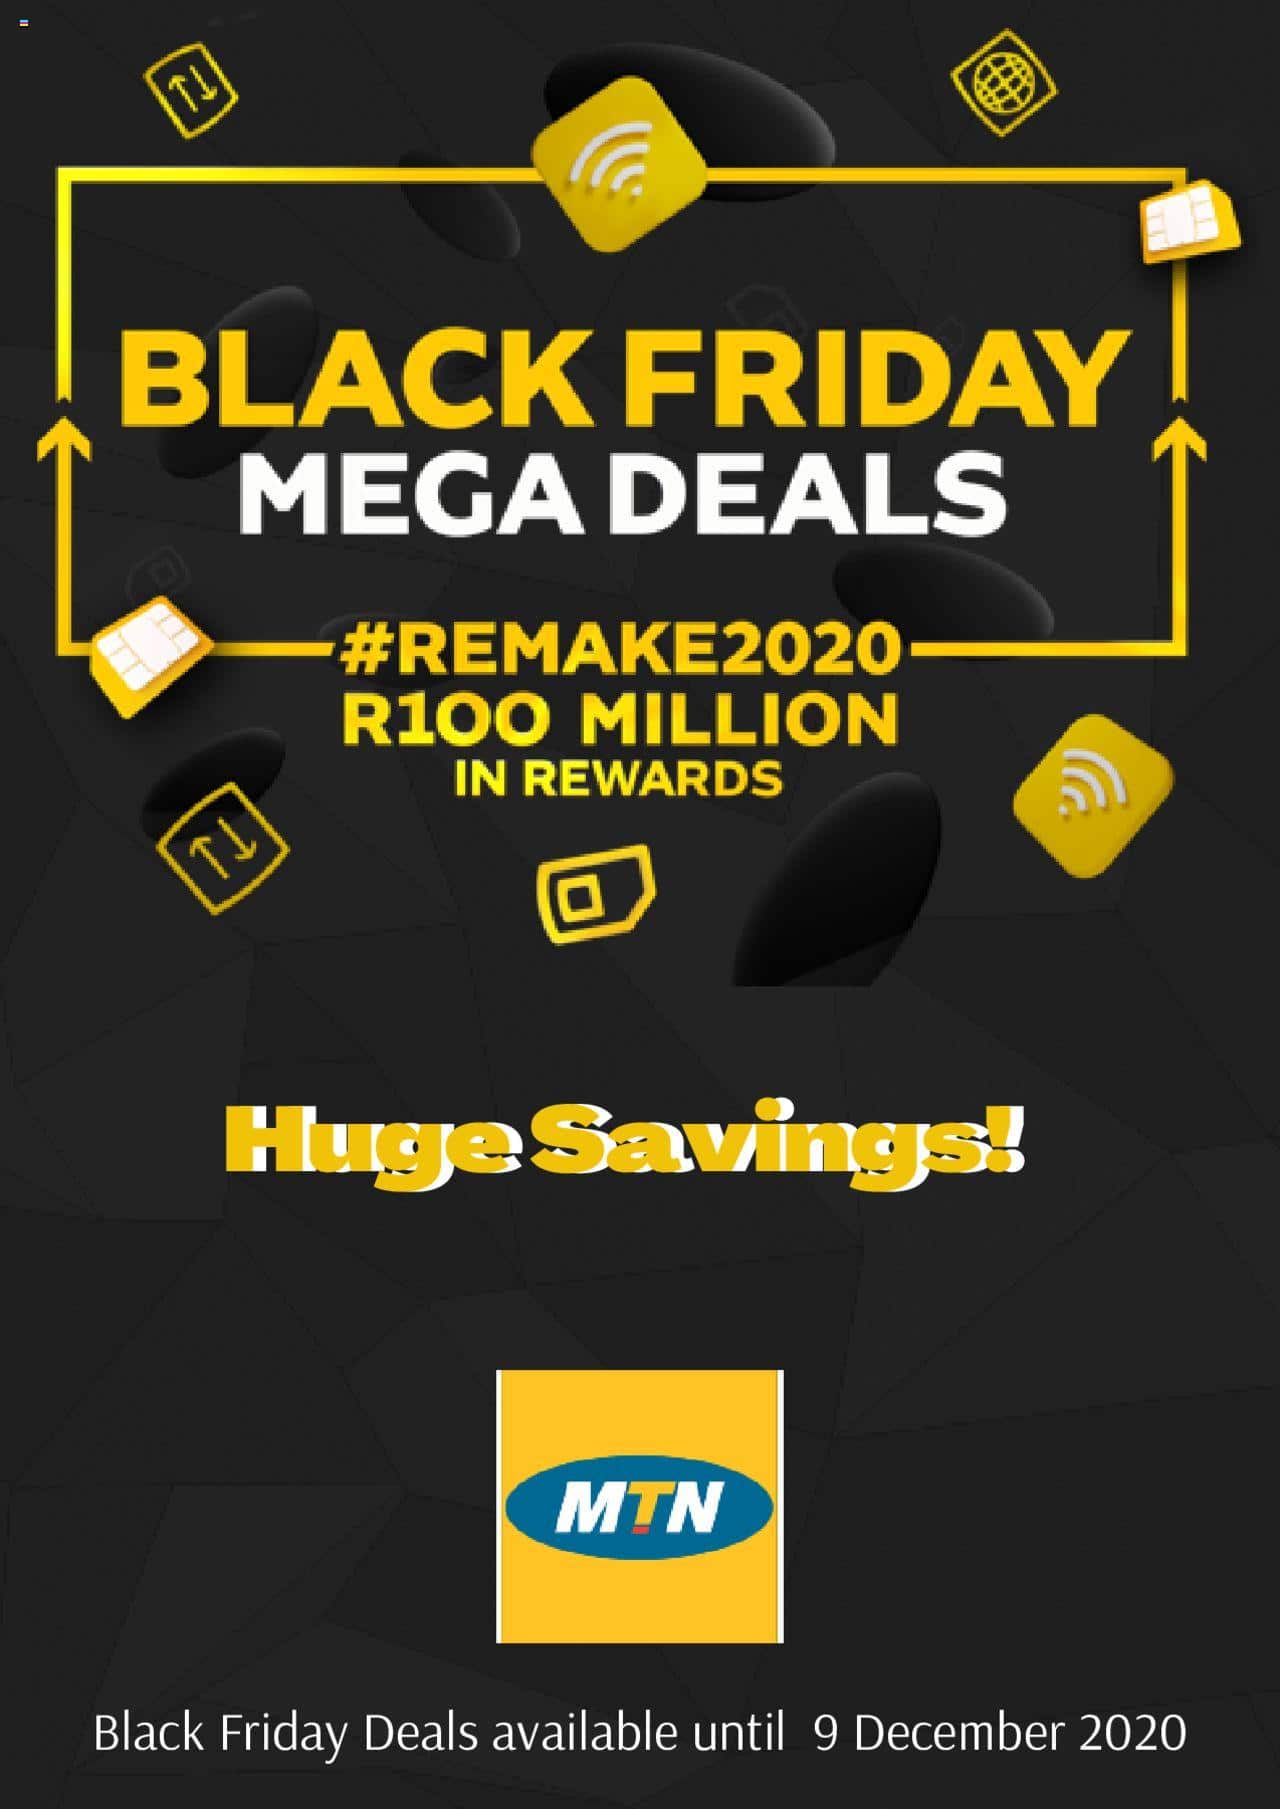 MTN Black Friday Deals & Specials 2021 - Will There Be Any Deals On Black Friday